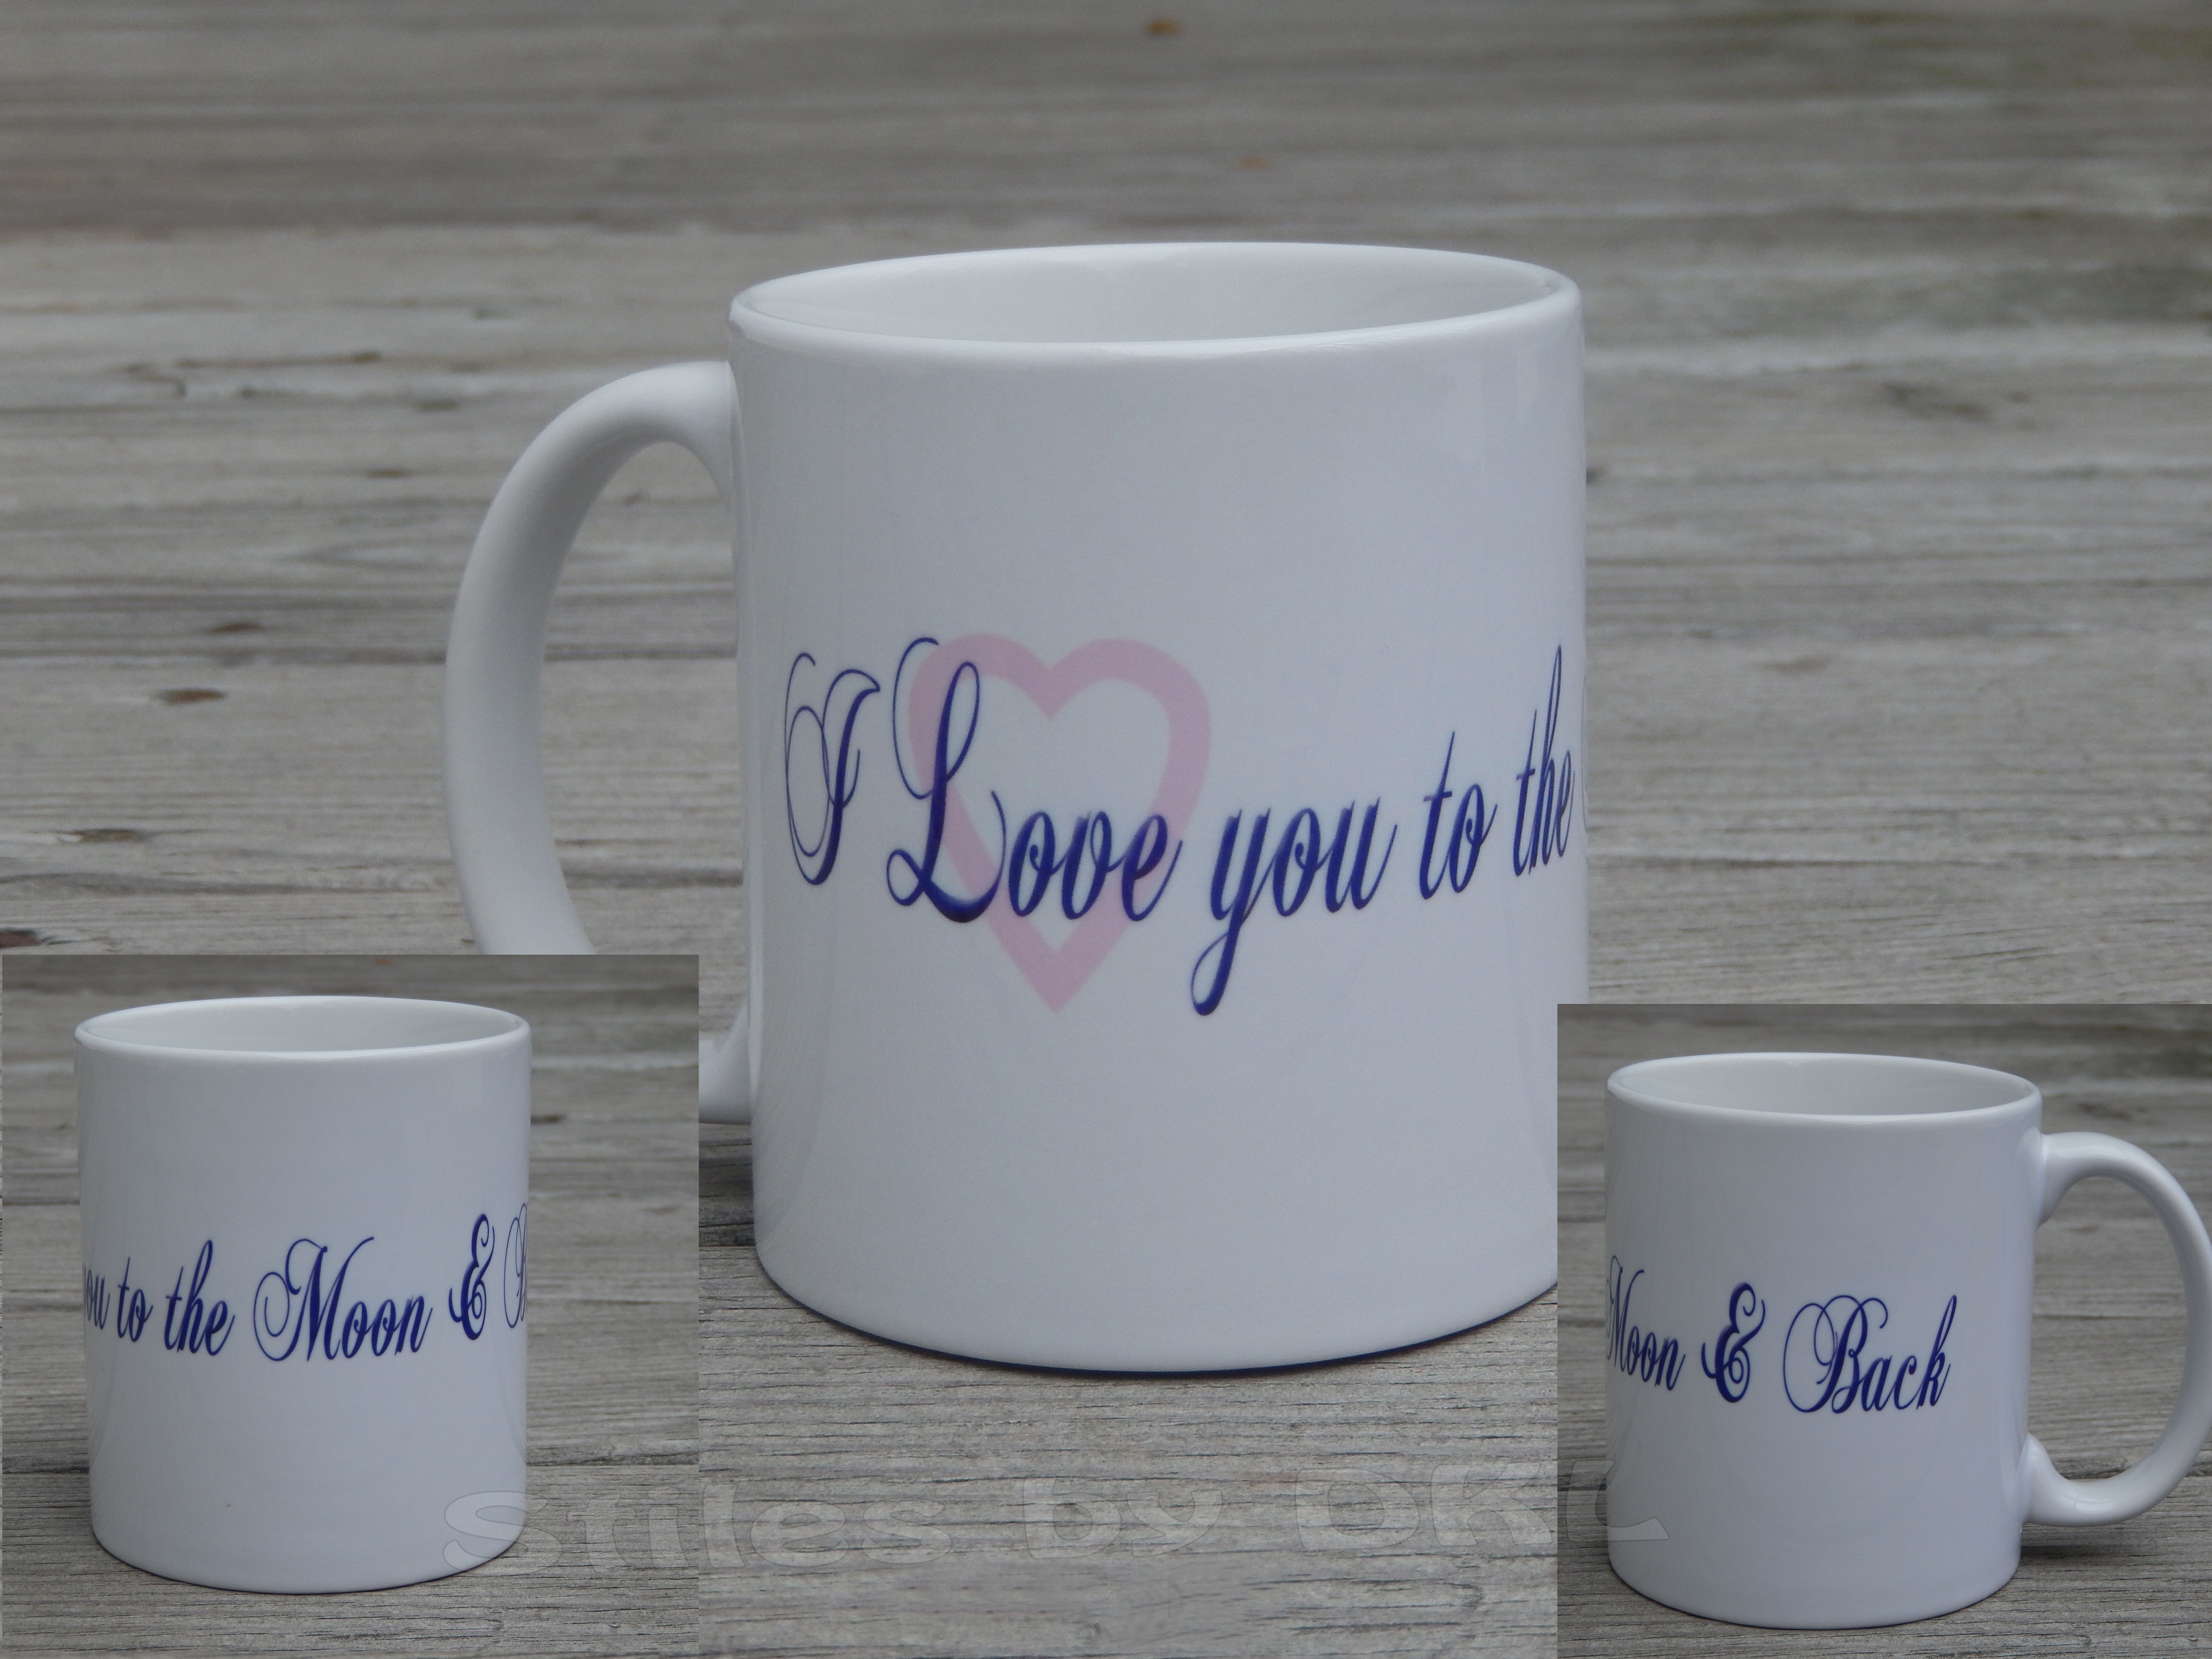 Text Wrap Mugs made with sublimation printing